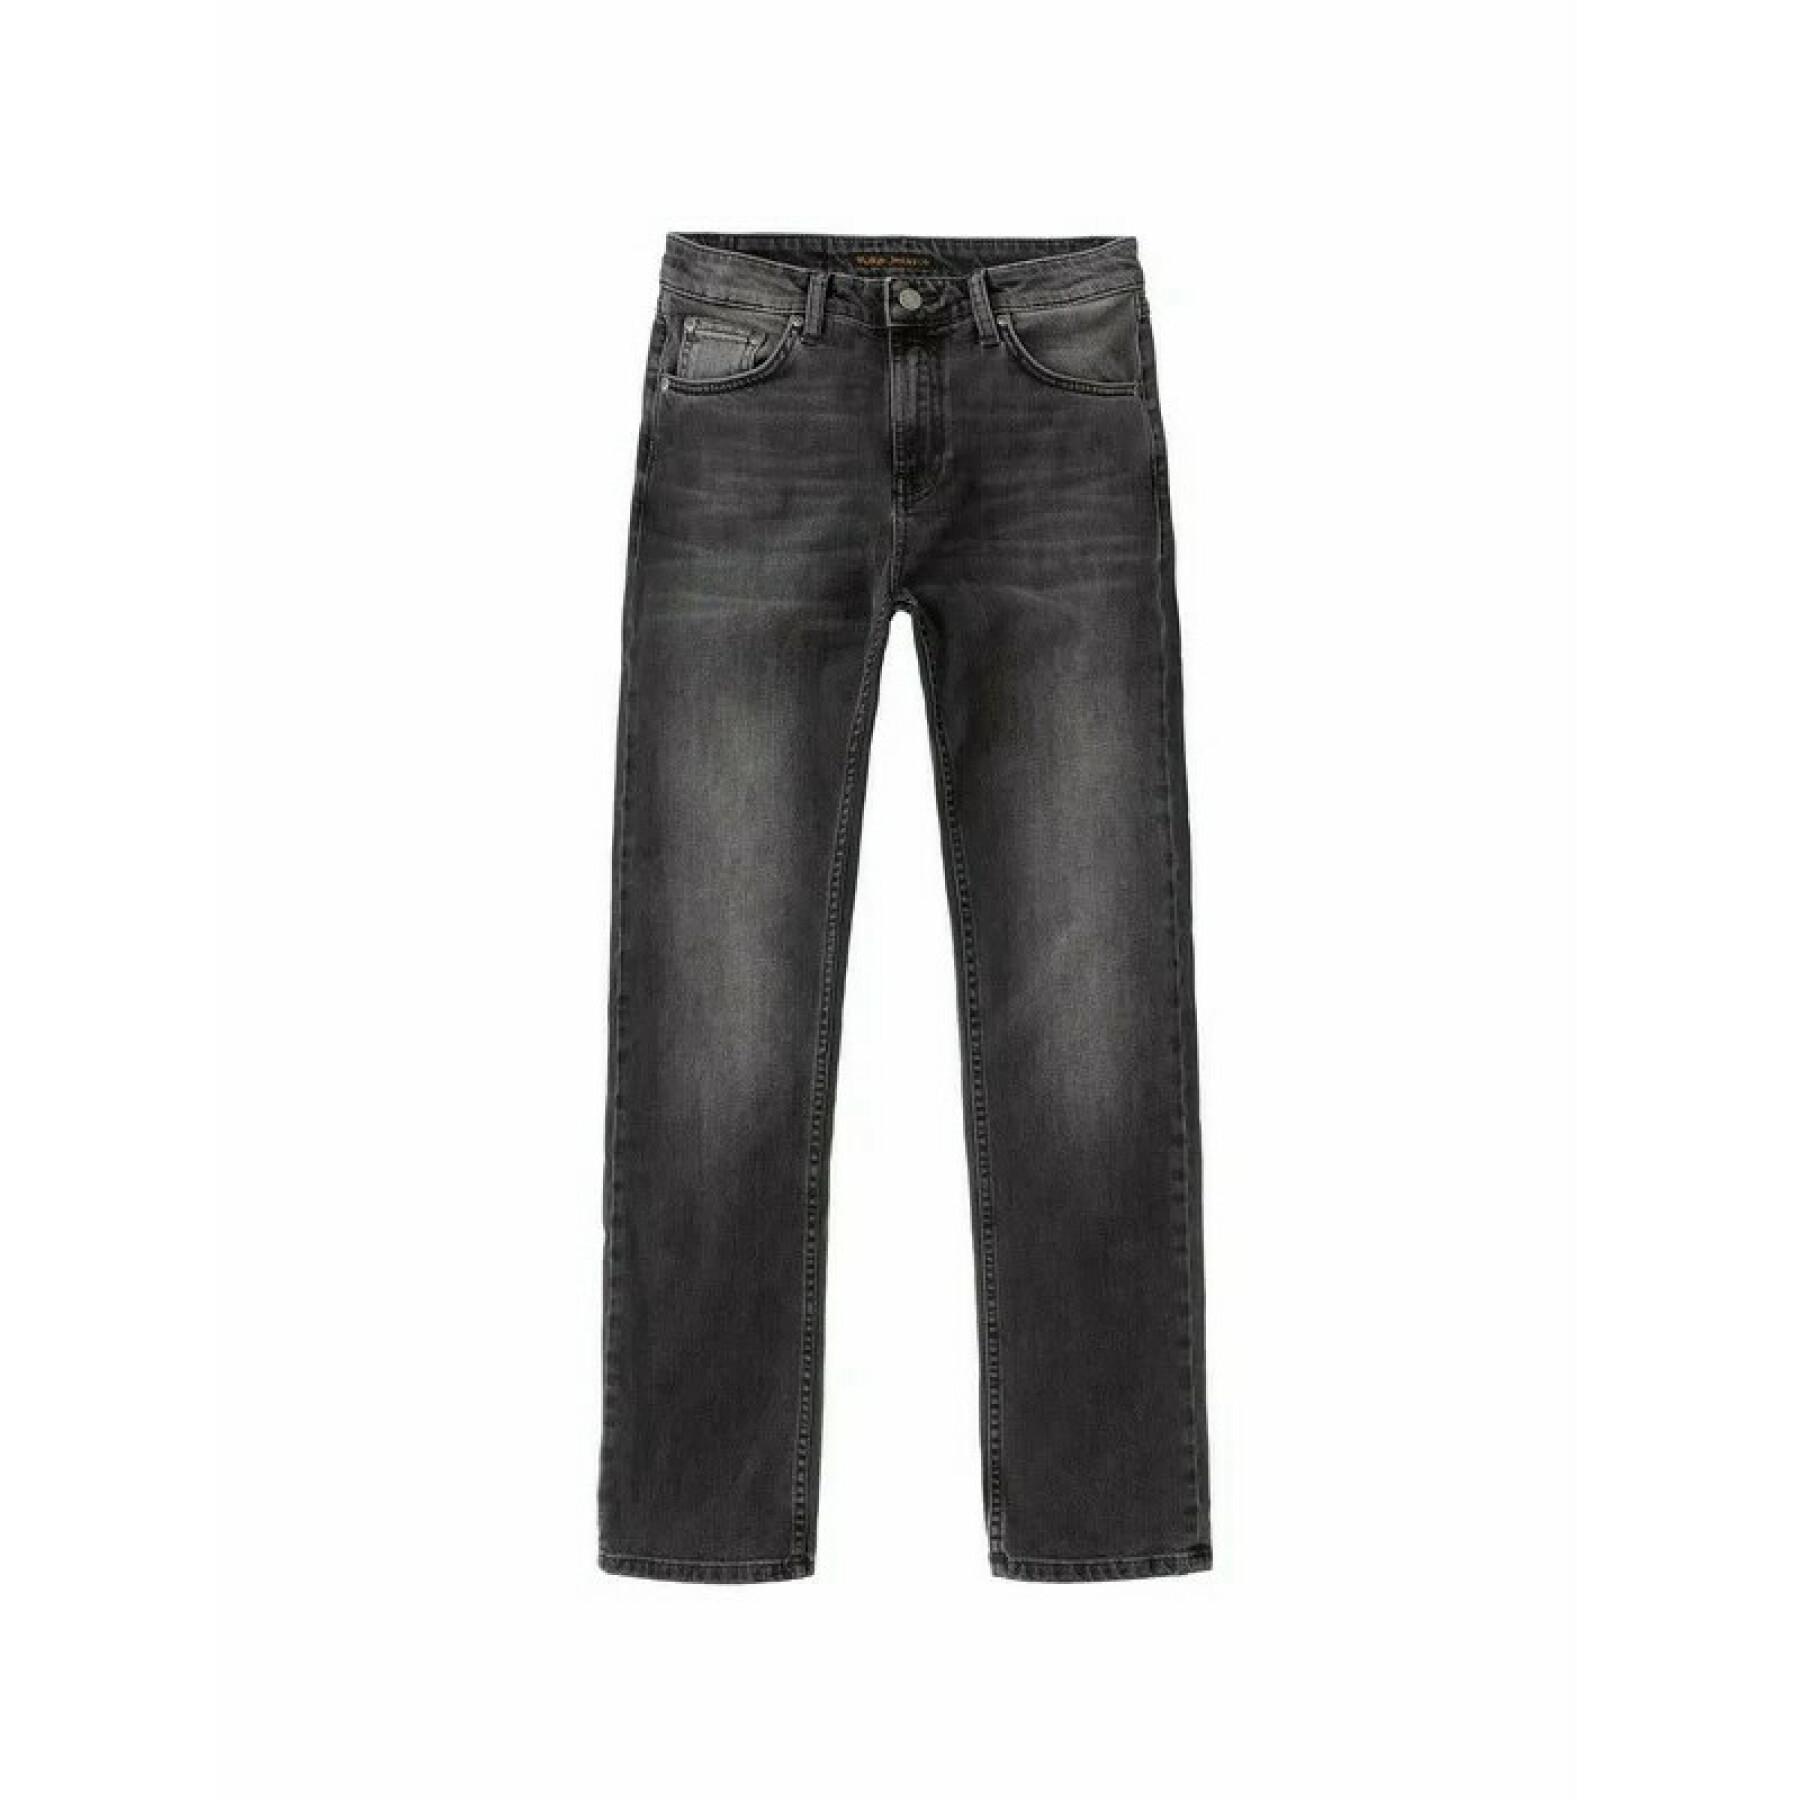 Women's jeans Nudie Jeans Straight sally